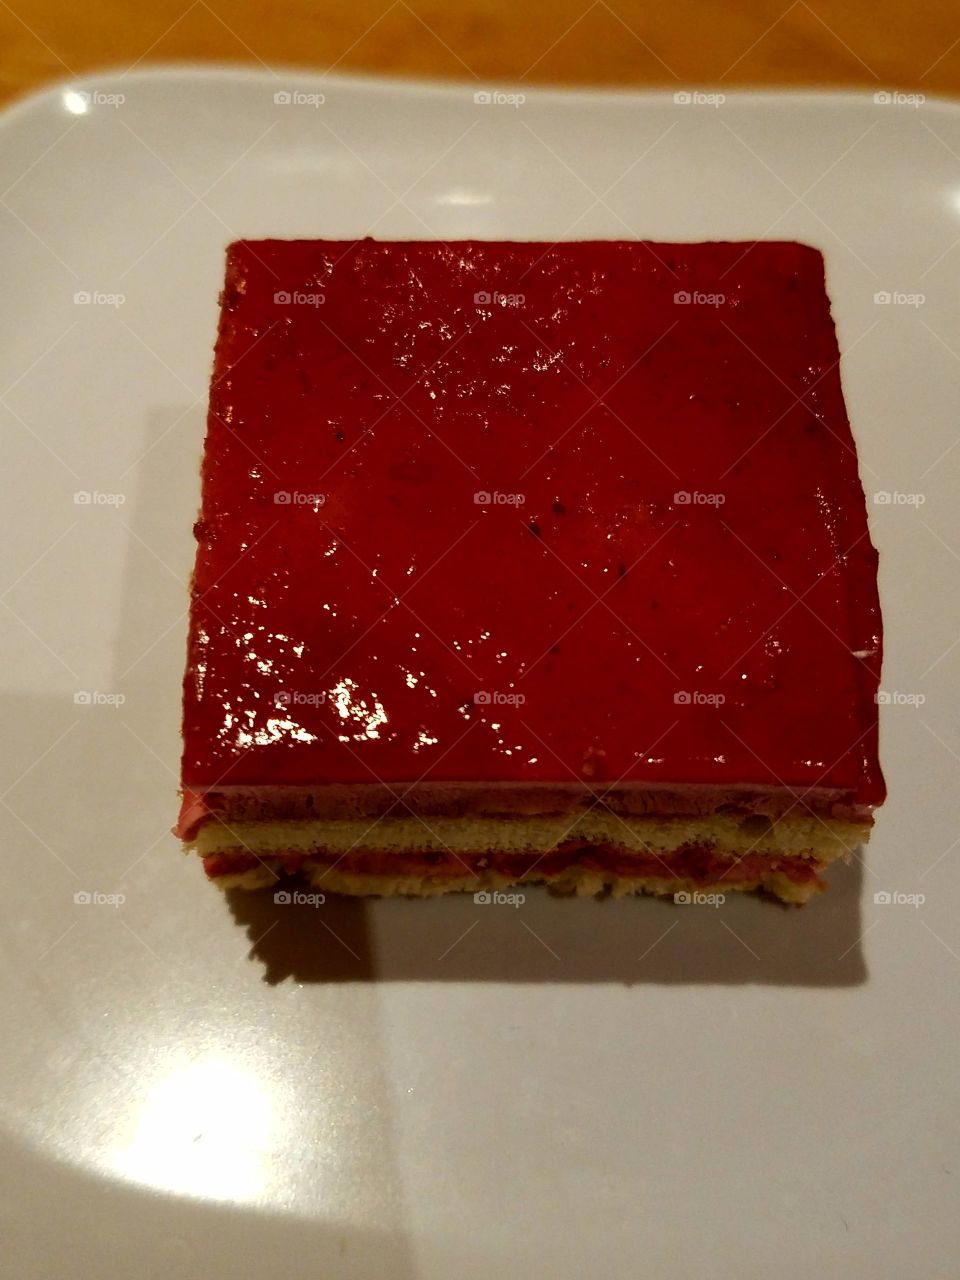 red layered cake with a strawberry glazed topping